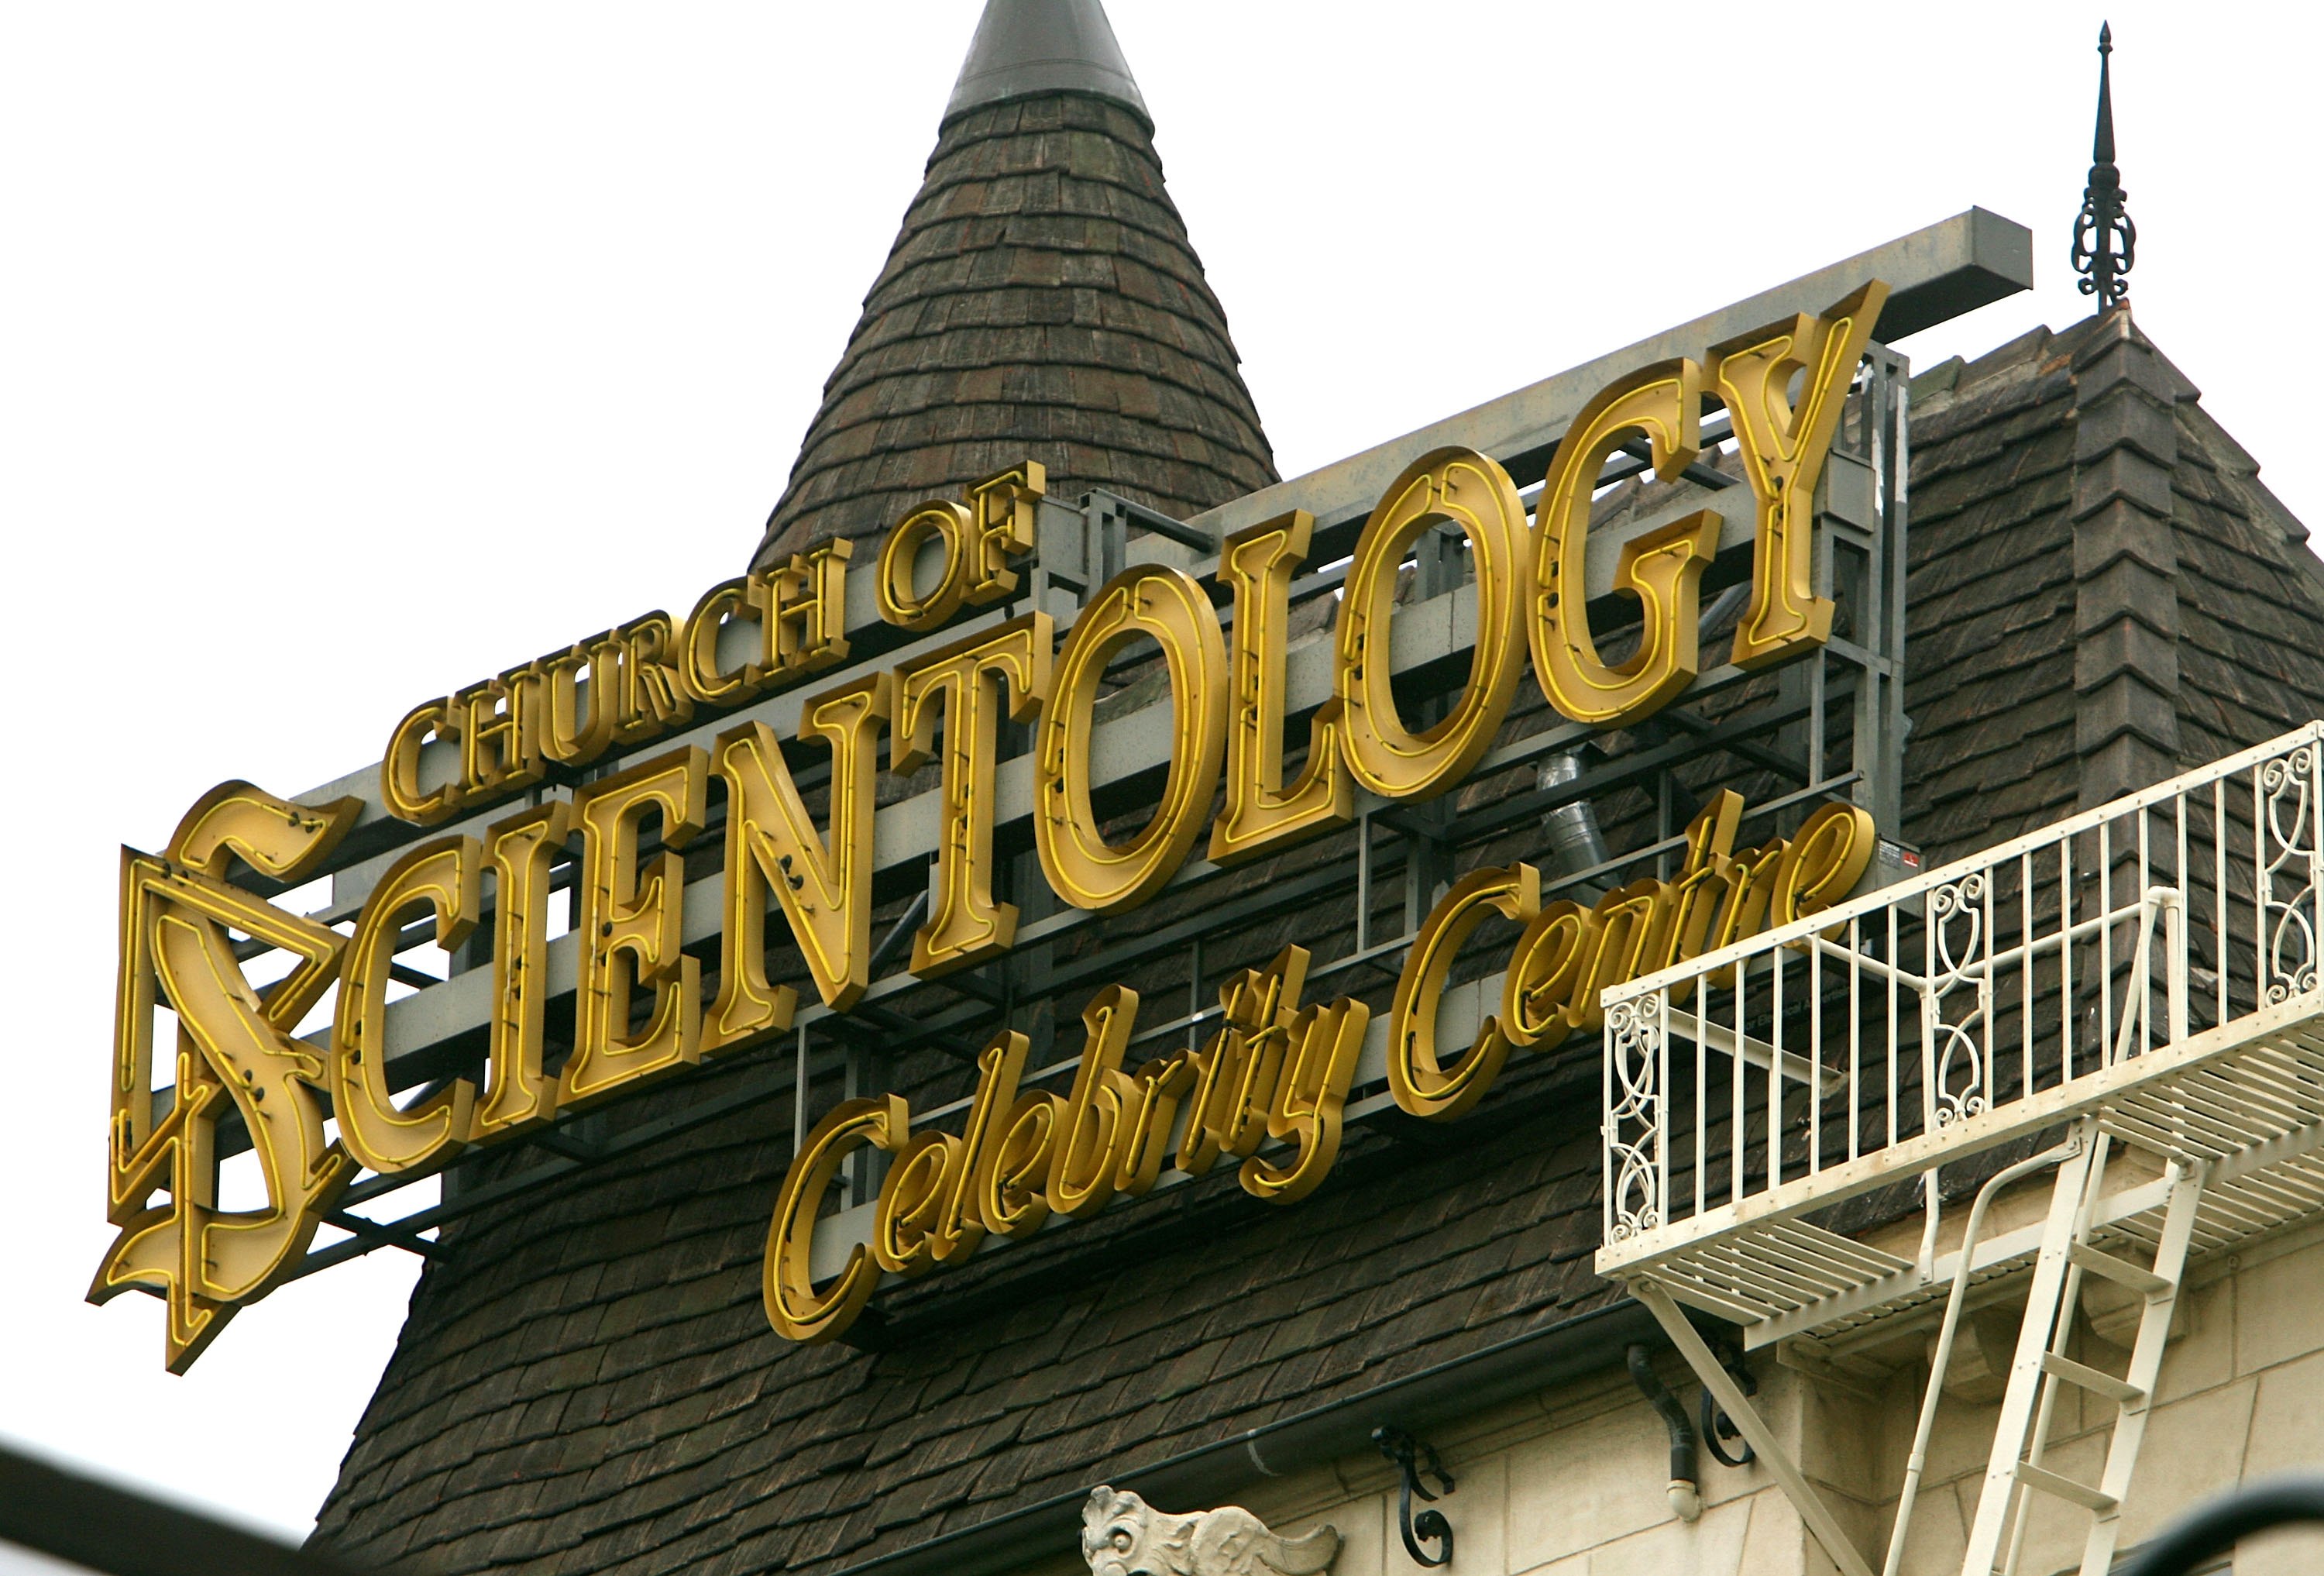 The Church of Scientology Celebrity Centre International on April 3, 2006 in Los Angeles, California | Source: Getty Images